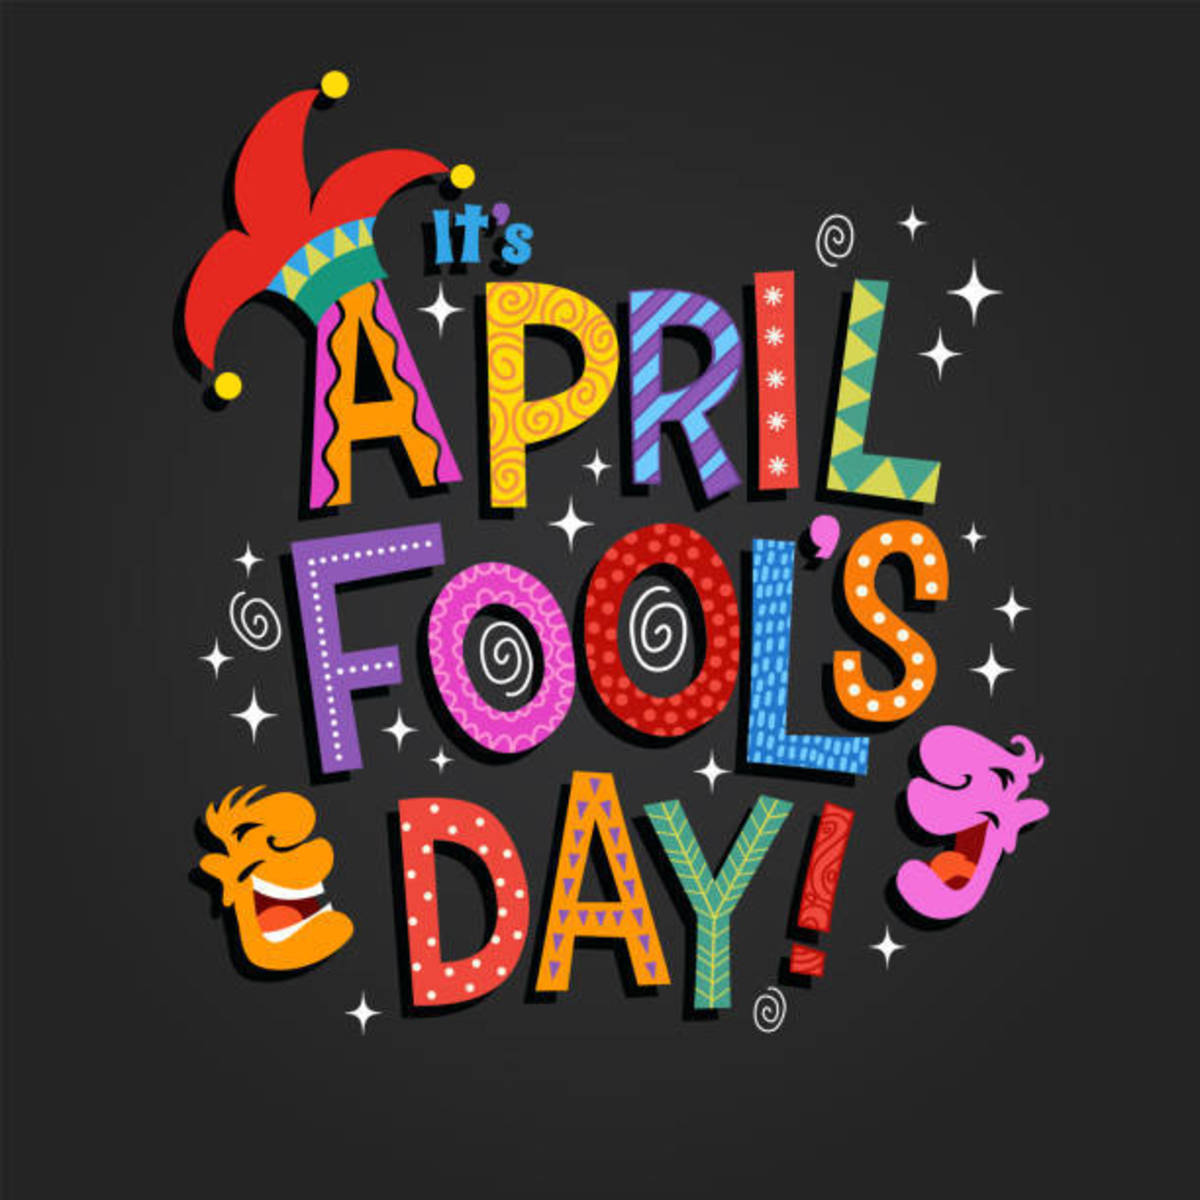 5-april-fool-hoaxes-that-trended-on-the-internet